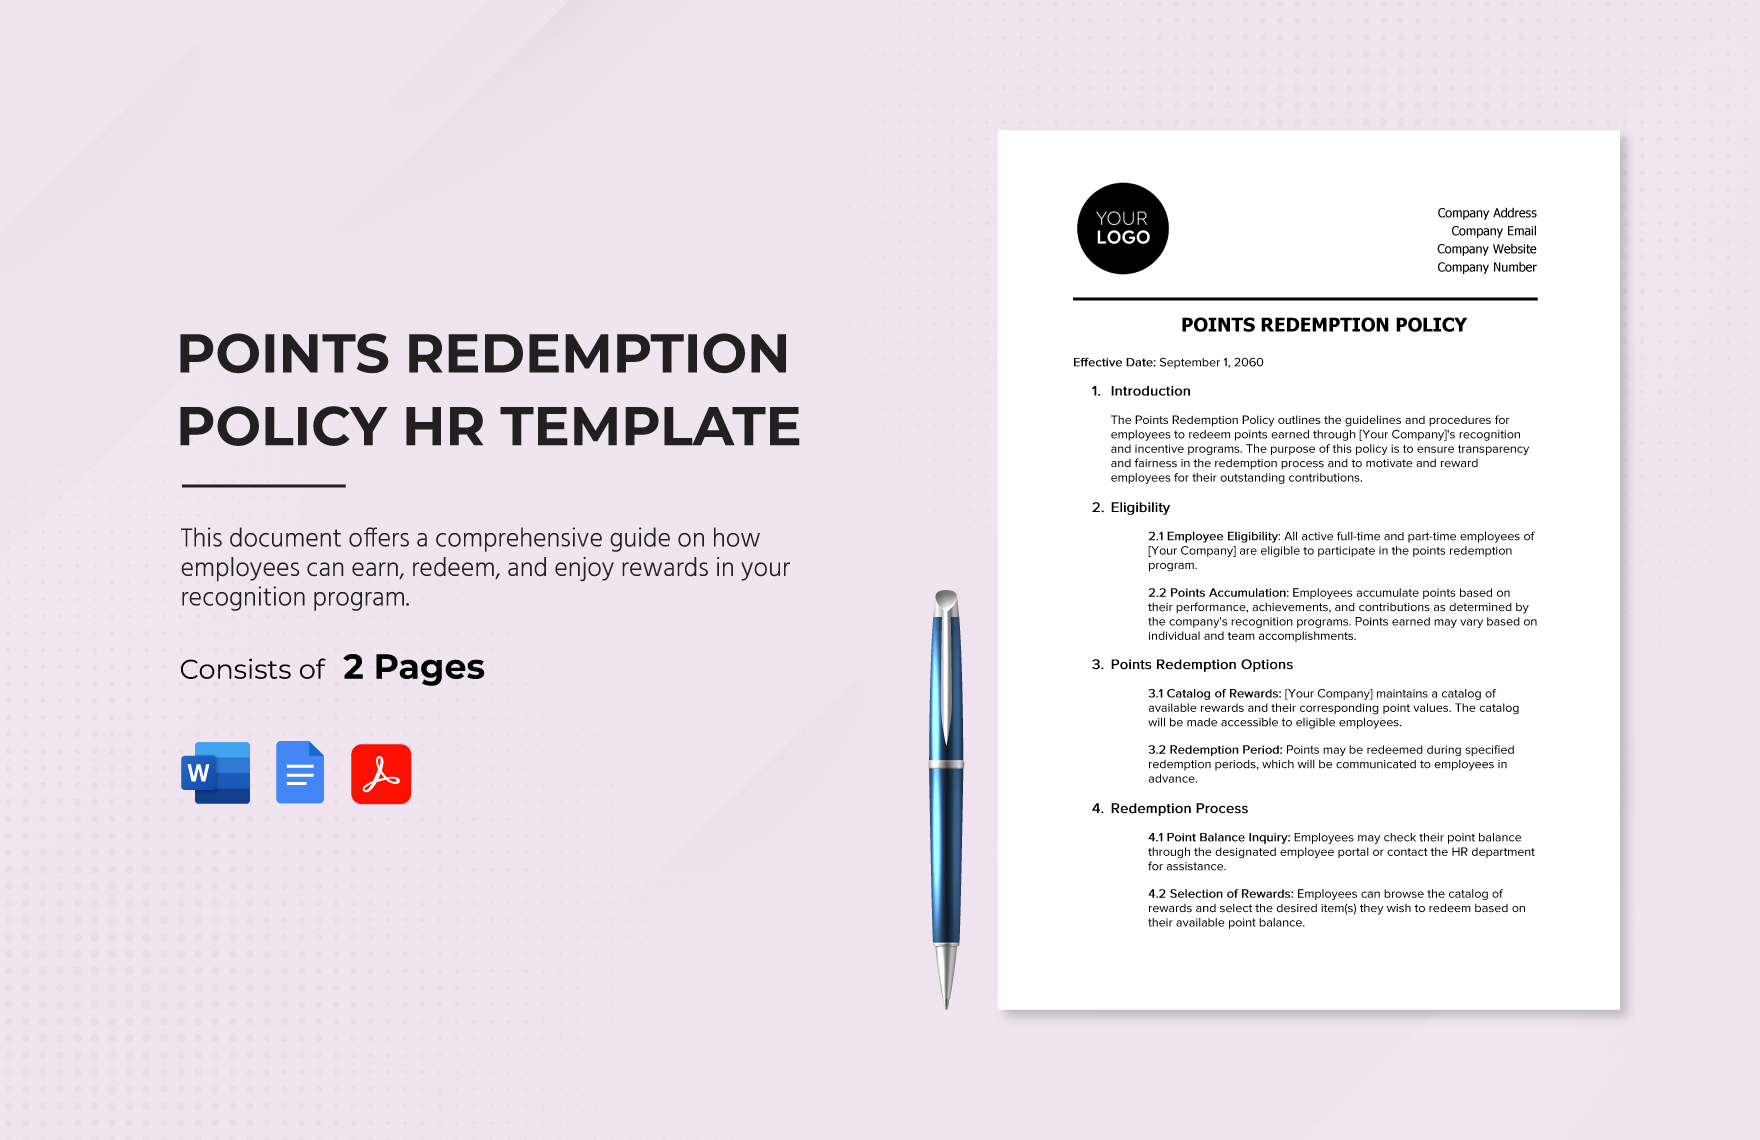 Points Redemption Policy HR Template